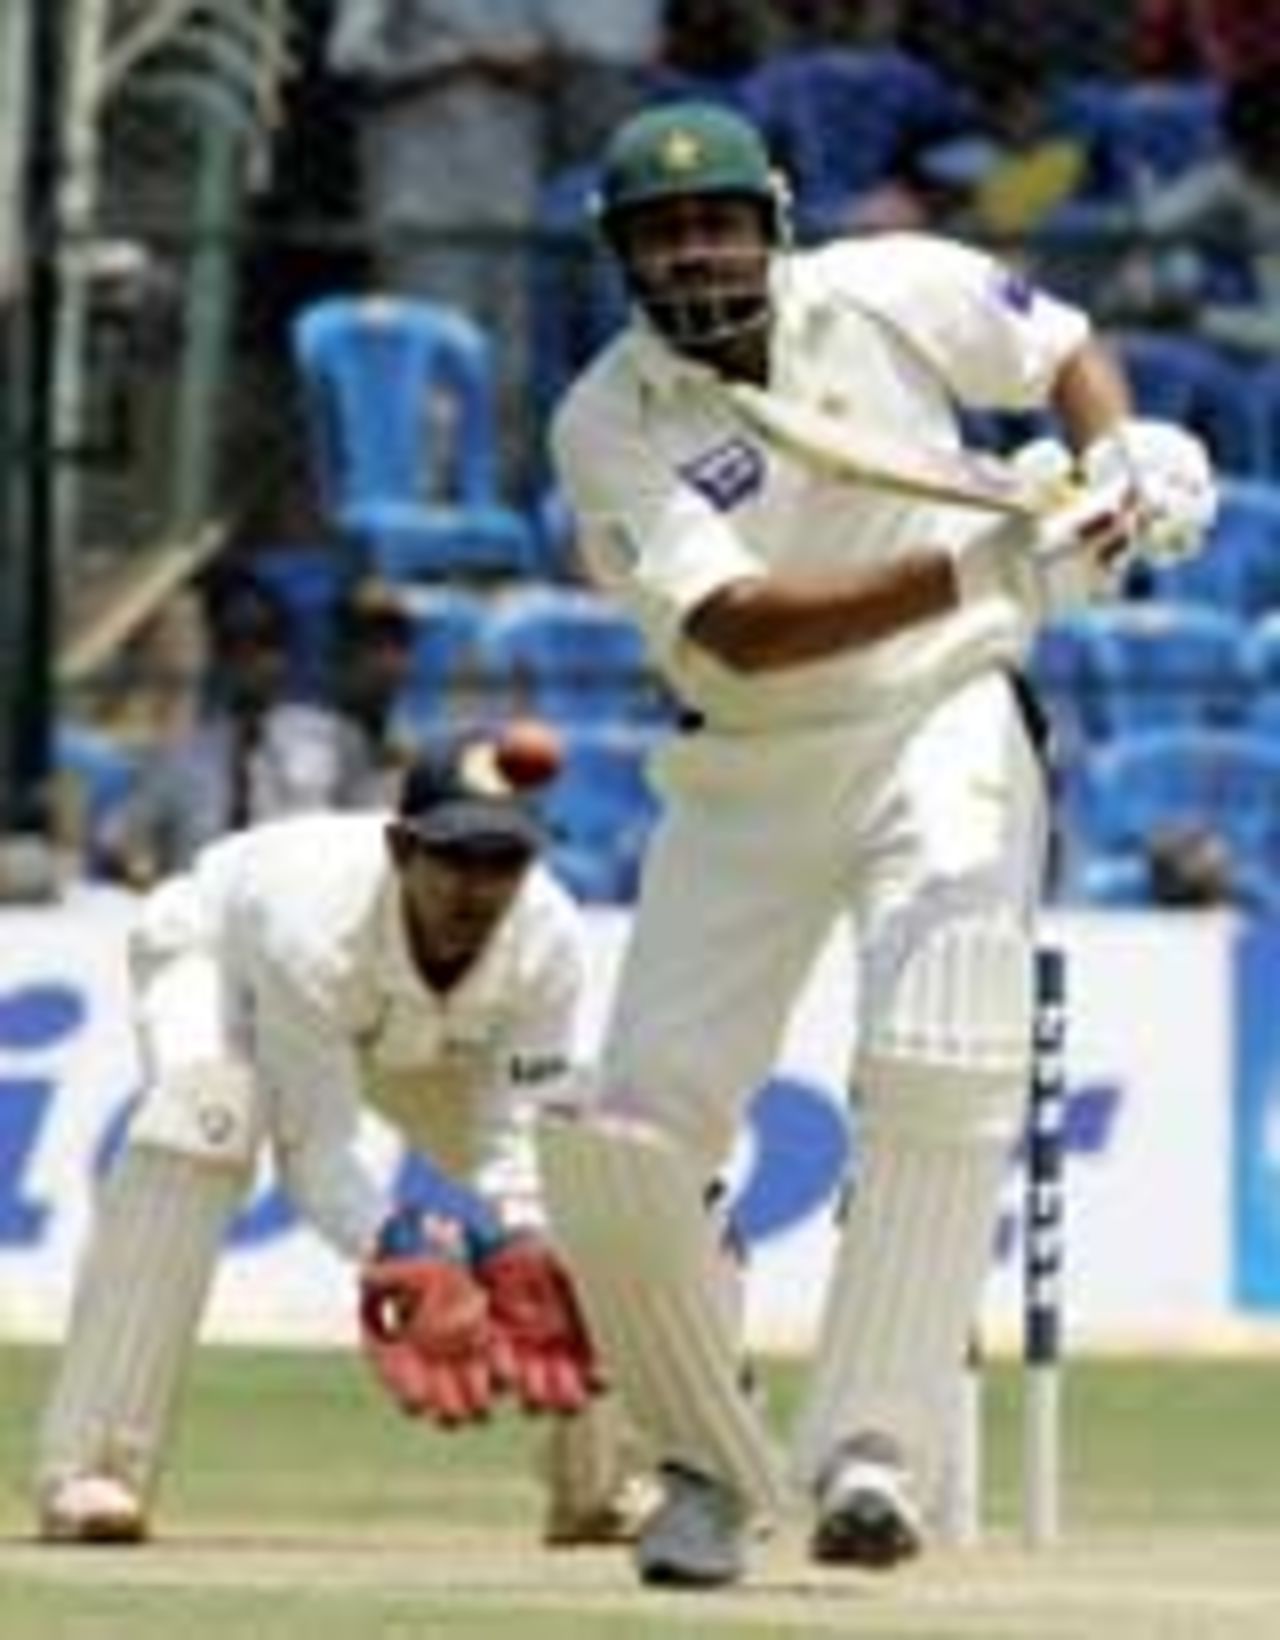 Inzamam-ul-Haq drives on the way to a century in his 100th Test, India v Pakistan, 3rd Test, Bangalore, 1st day, March 24, 2005